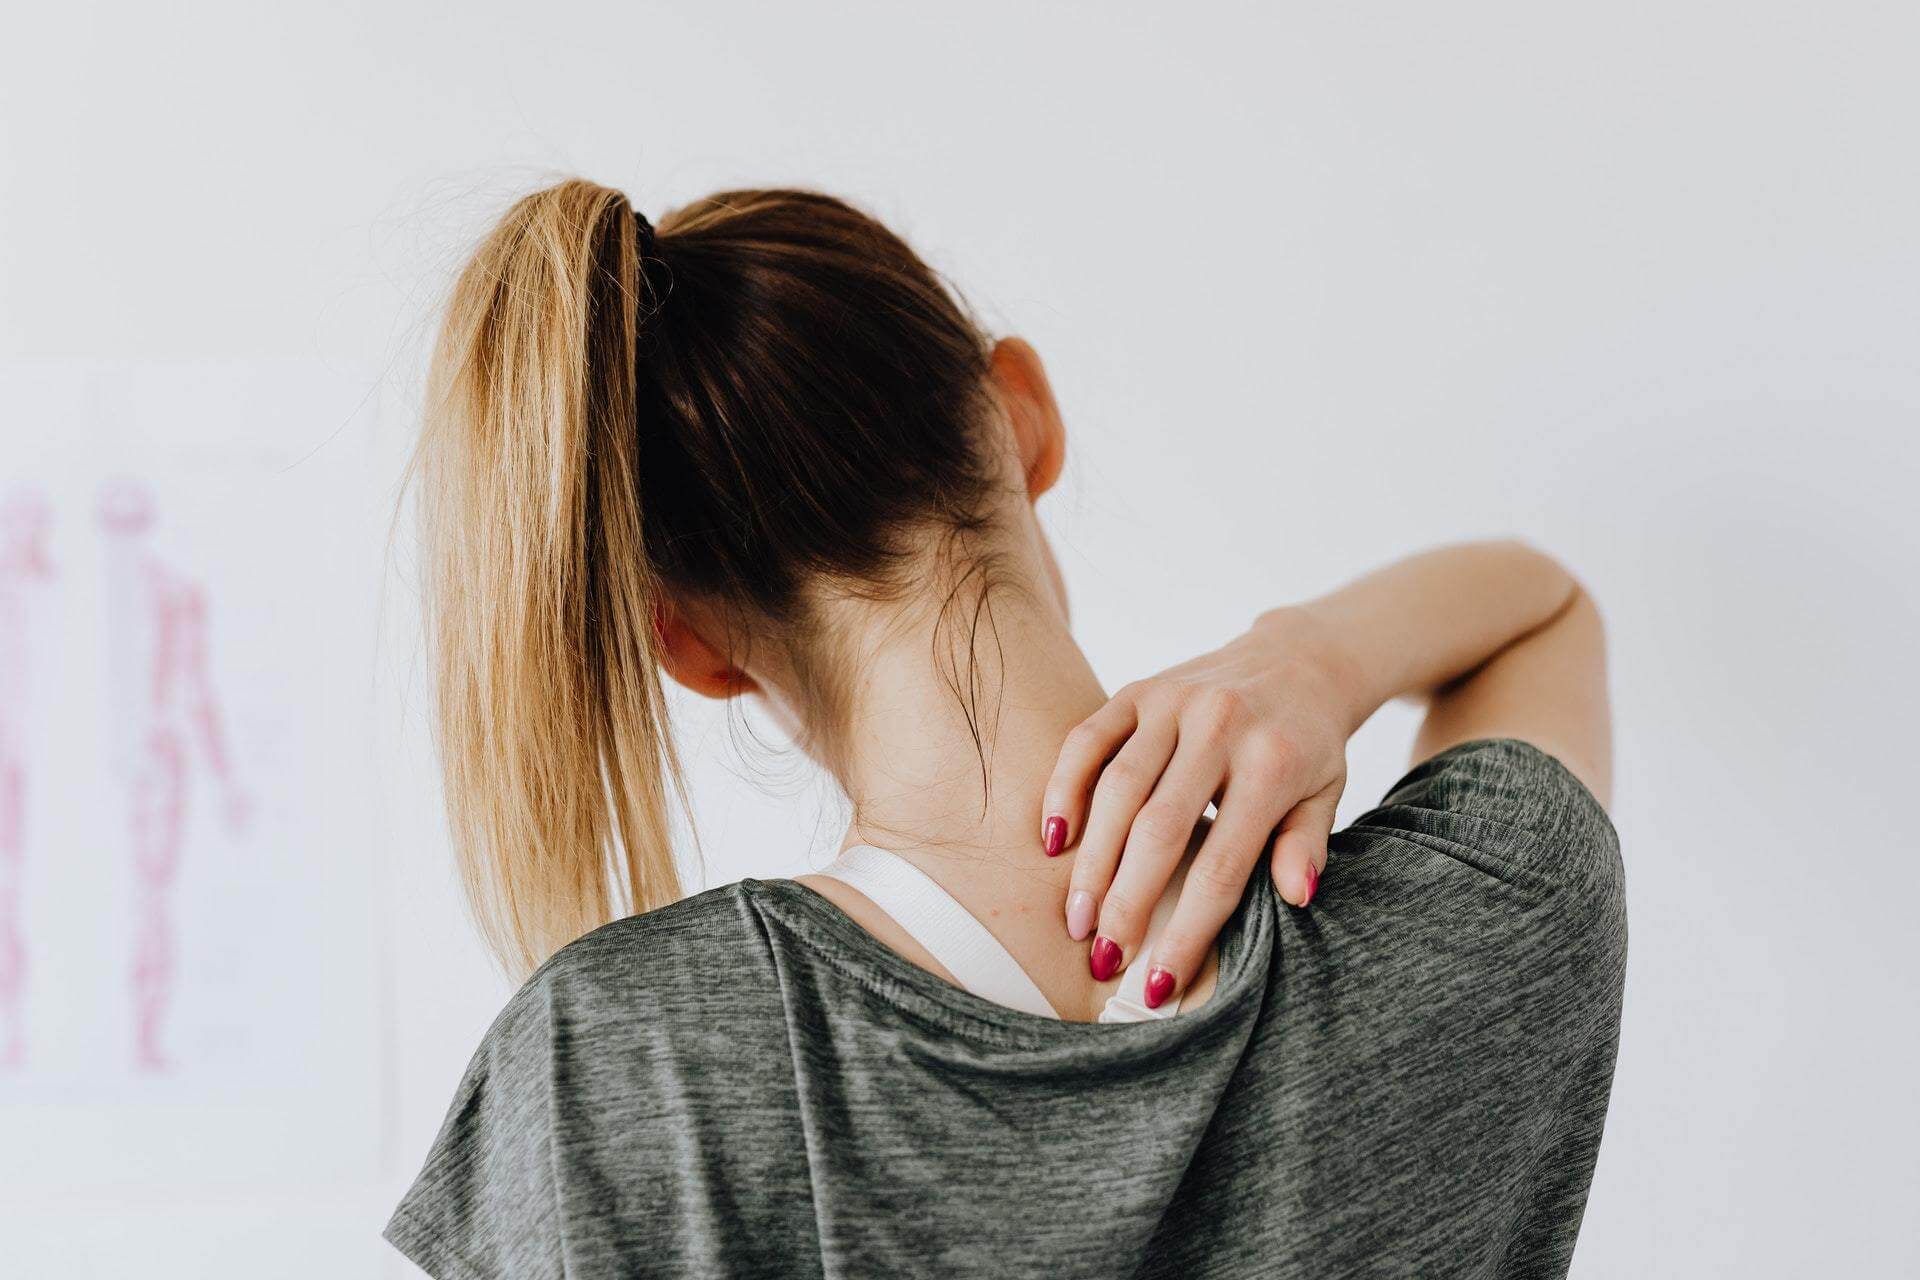 5 Easy At-Home Remedies for Upper Back Pain